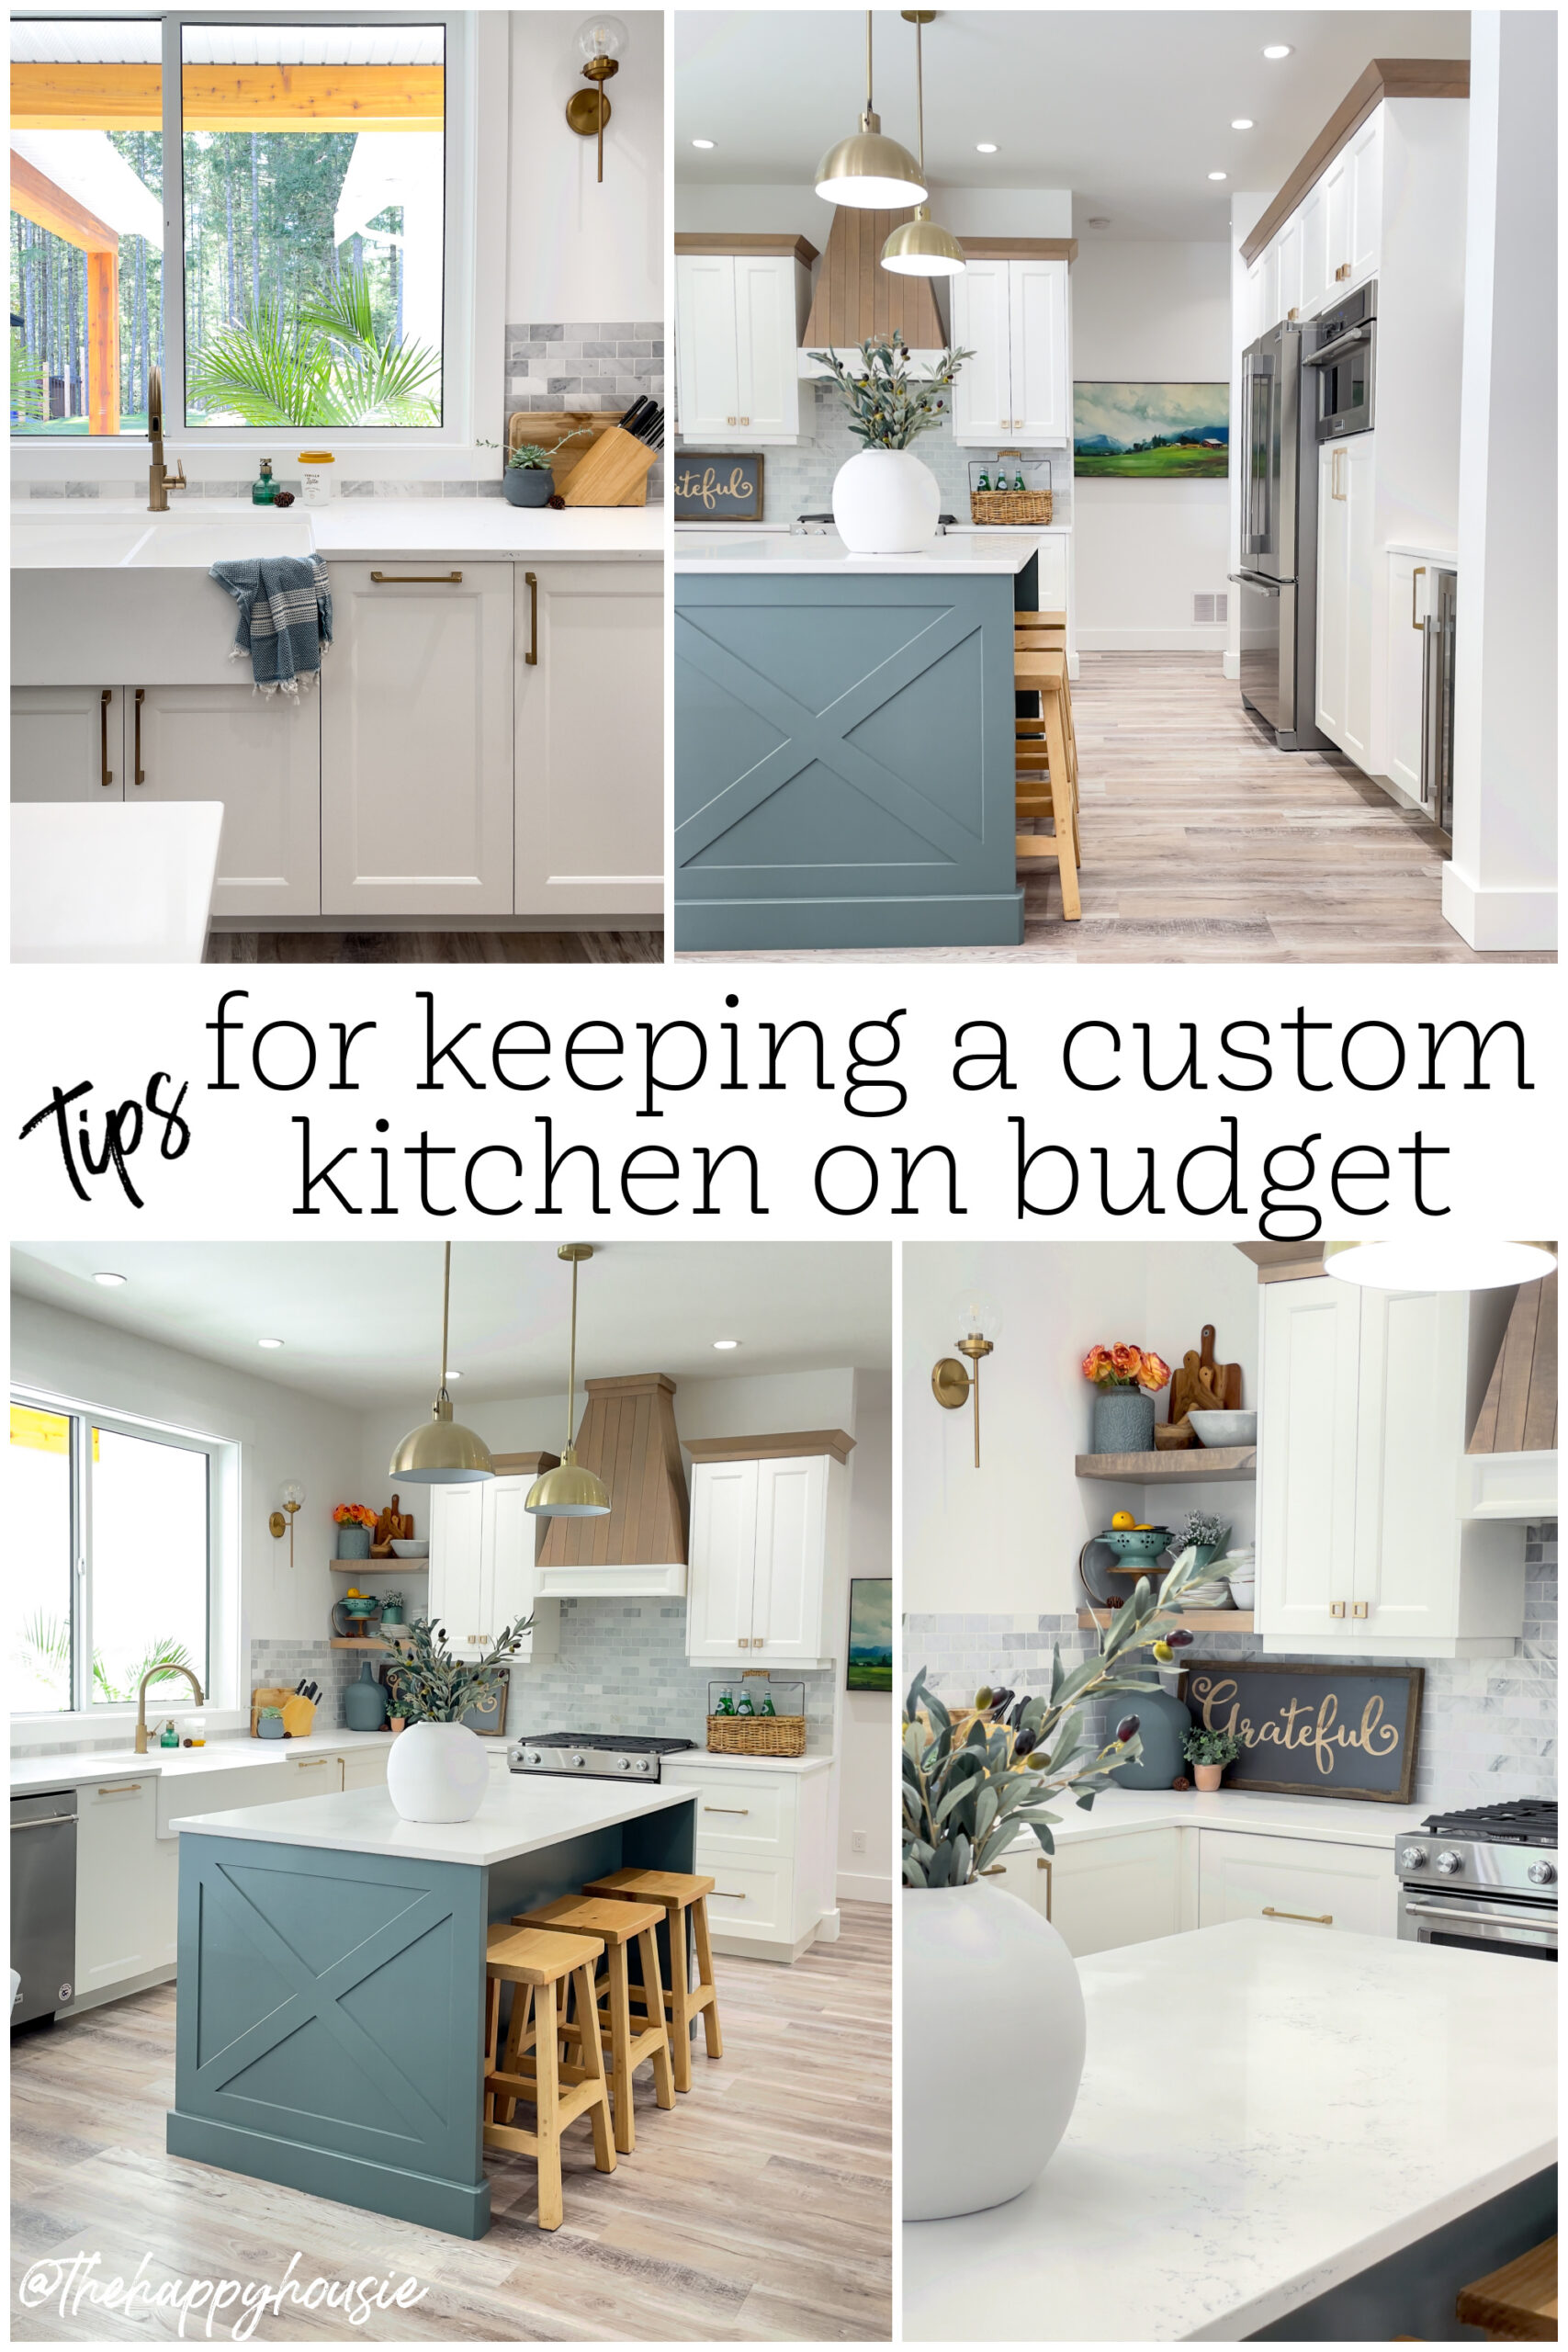 How to achieve a farmhouse kitchen look – the materials and